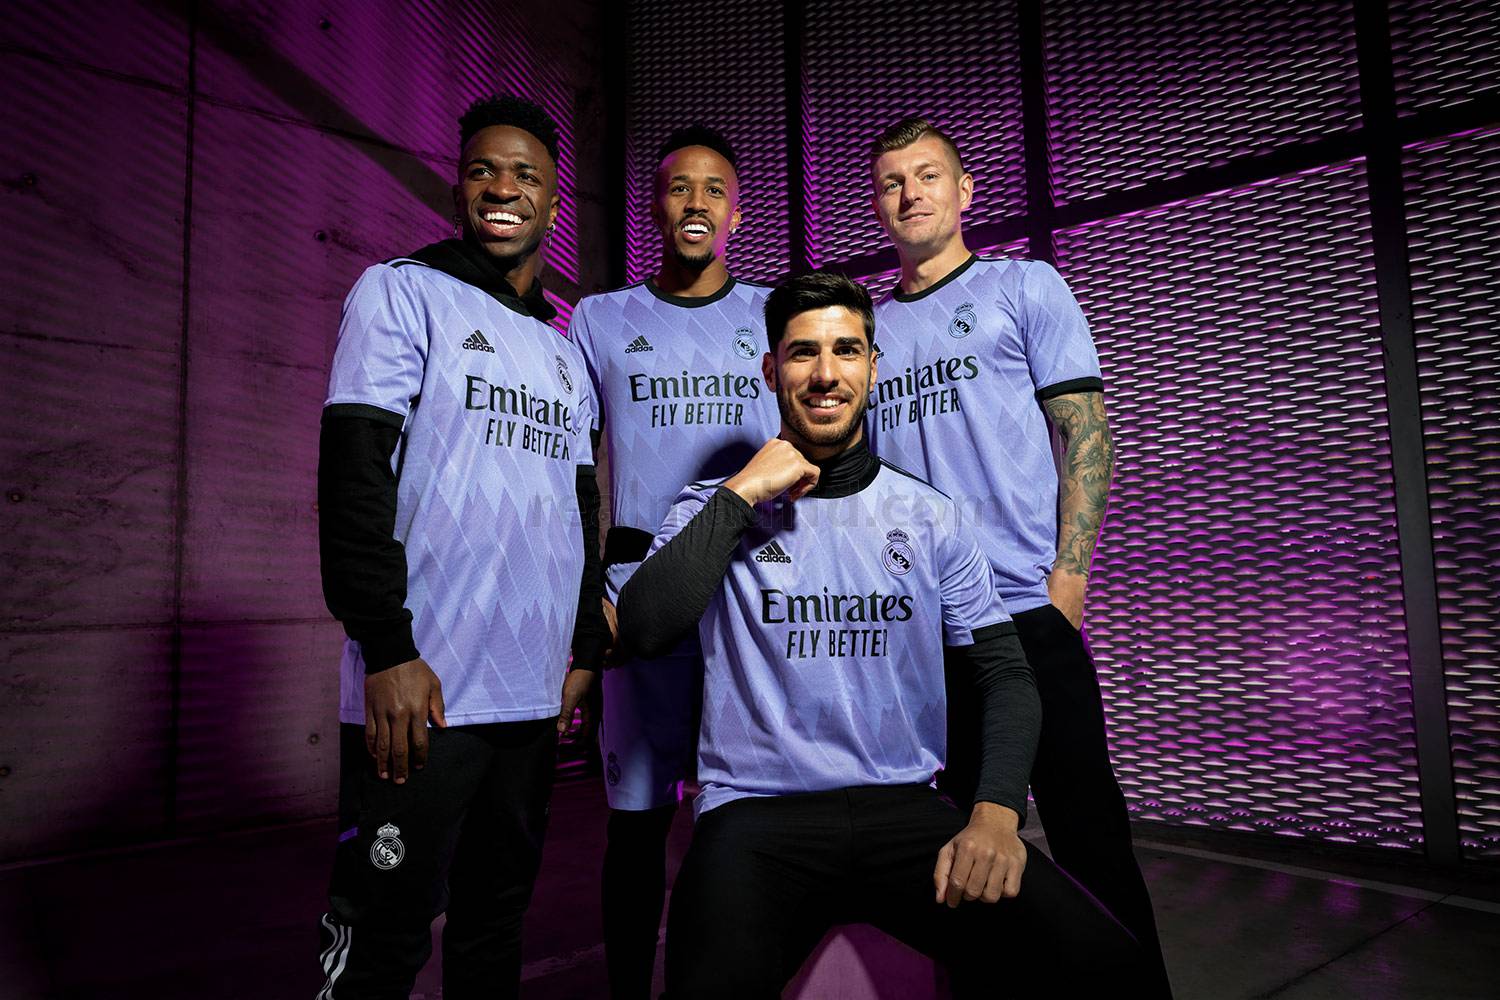 adidas Reveals 22/23 Away Jersey for Real Madrid - The Center Circle - A  SoccerPro Soccer Fan Blog